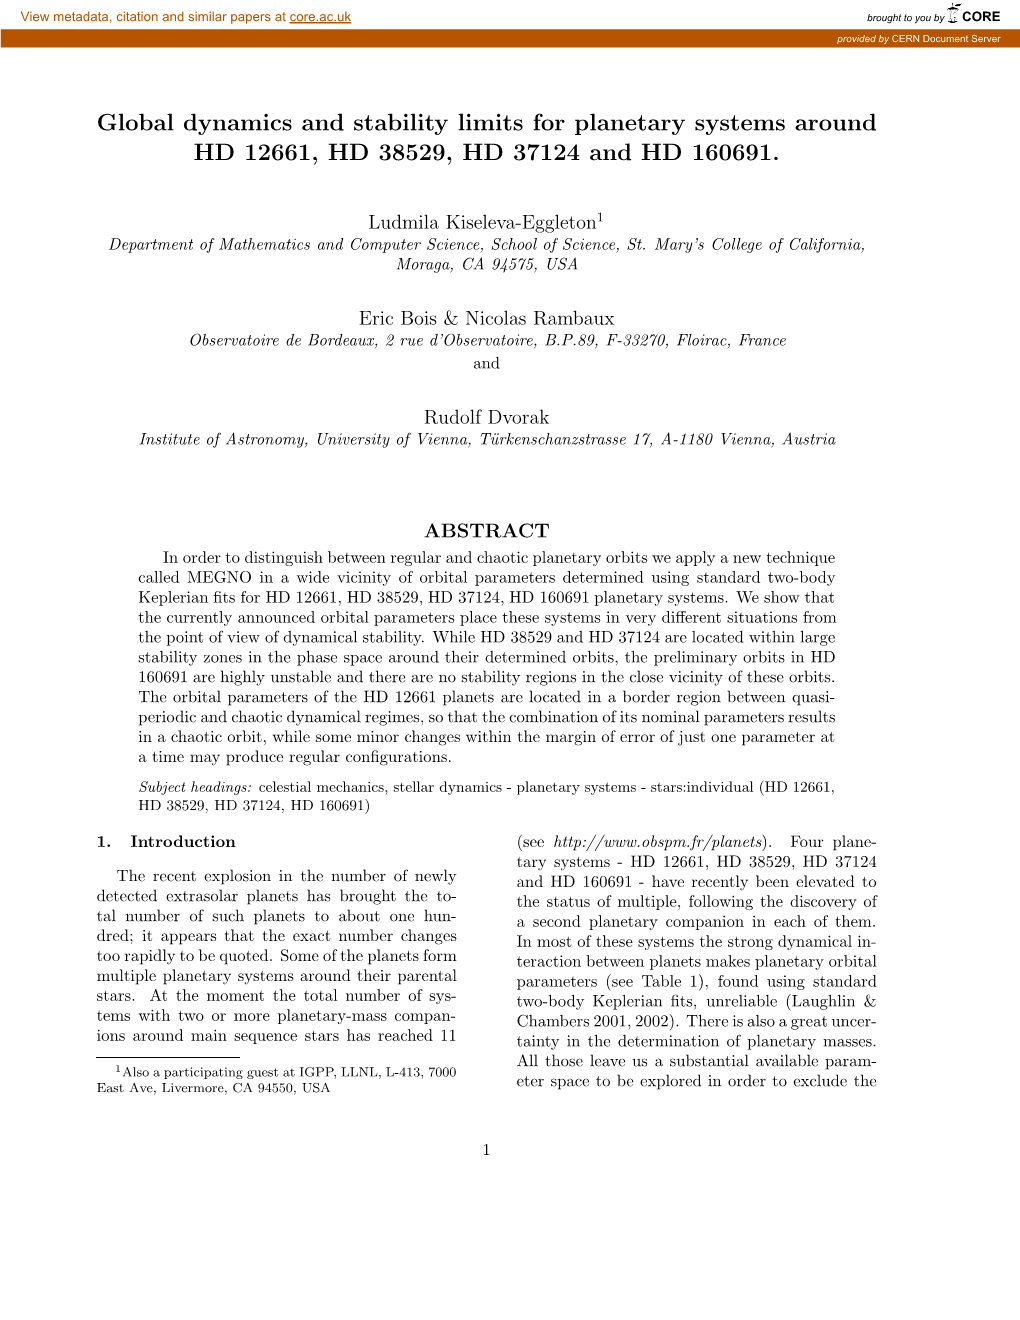 Global Dynamics and Stability Limits for Planetary Systems Around HD 12661, HD 38529, HD 37124 and HD 160691